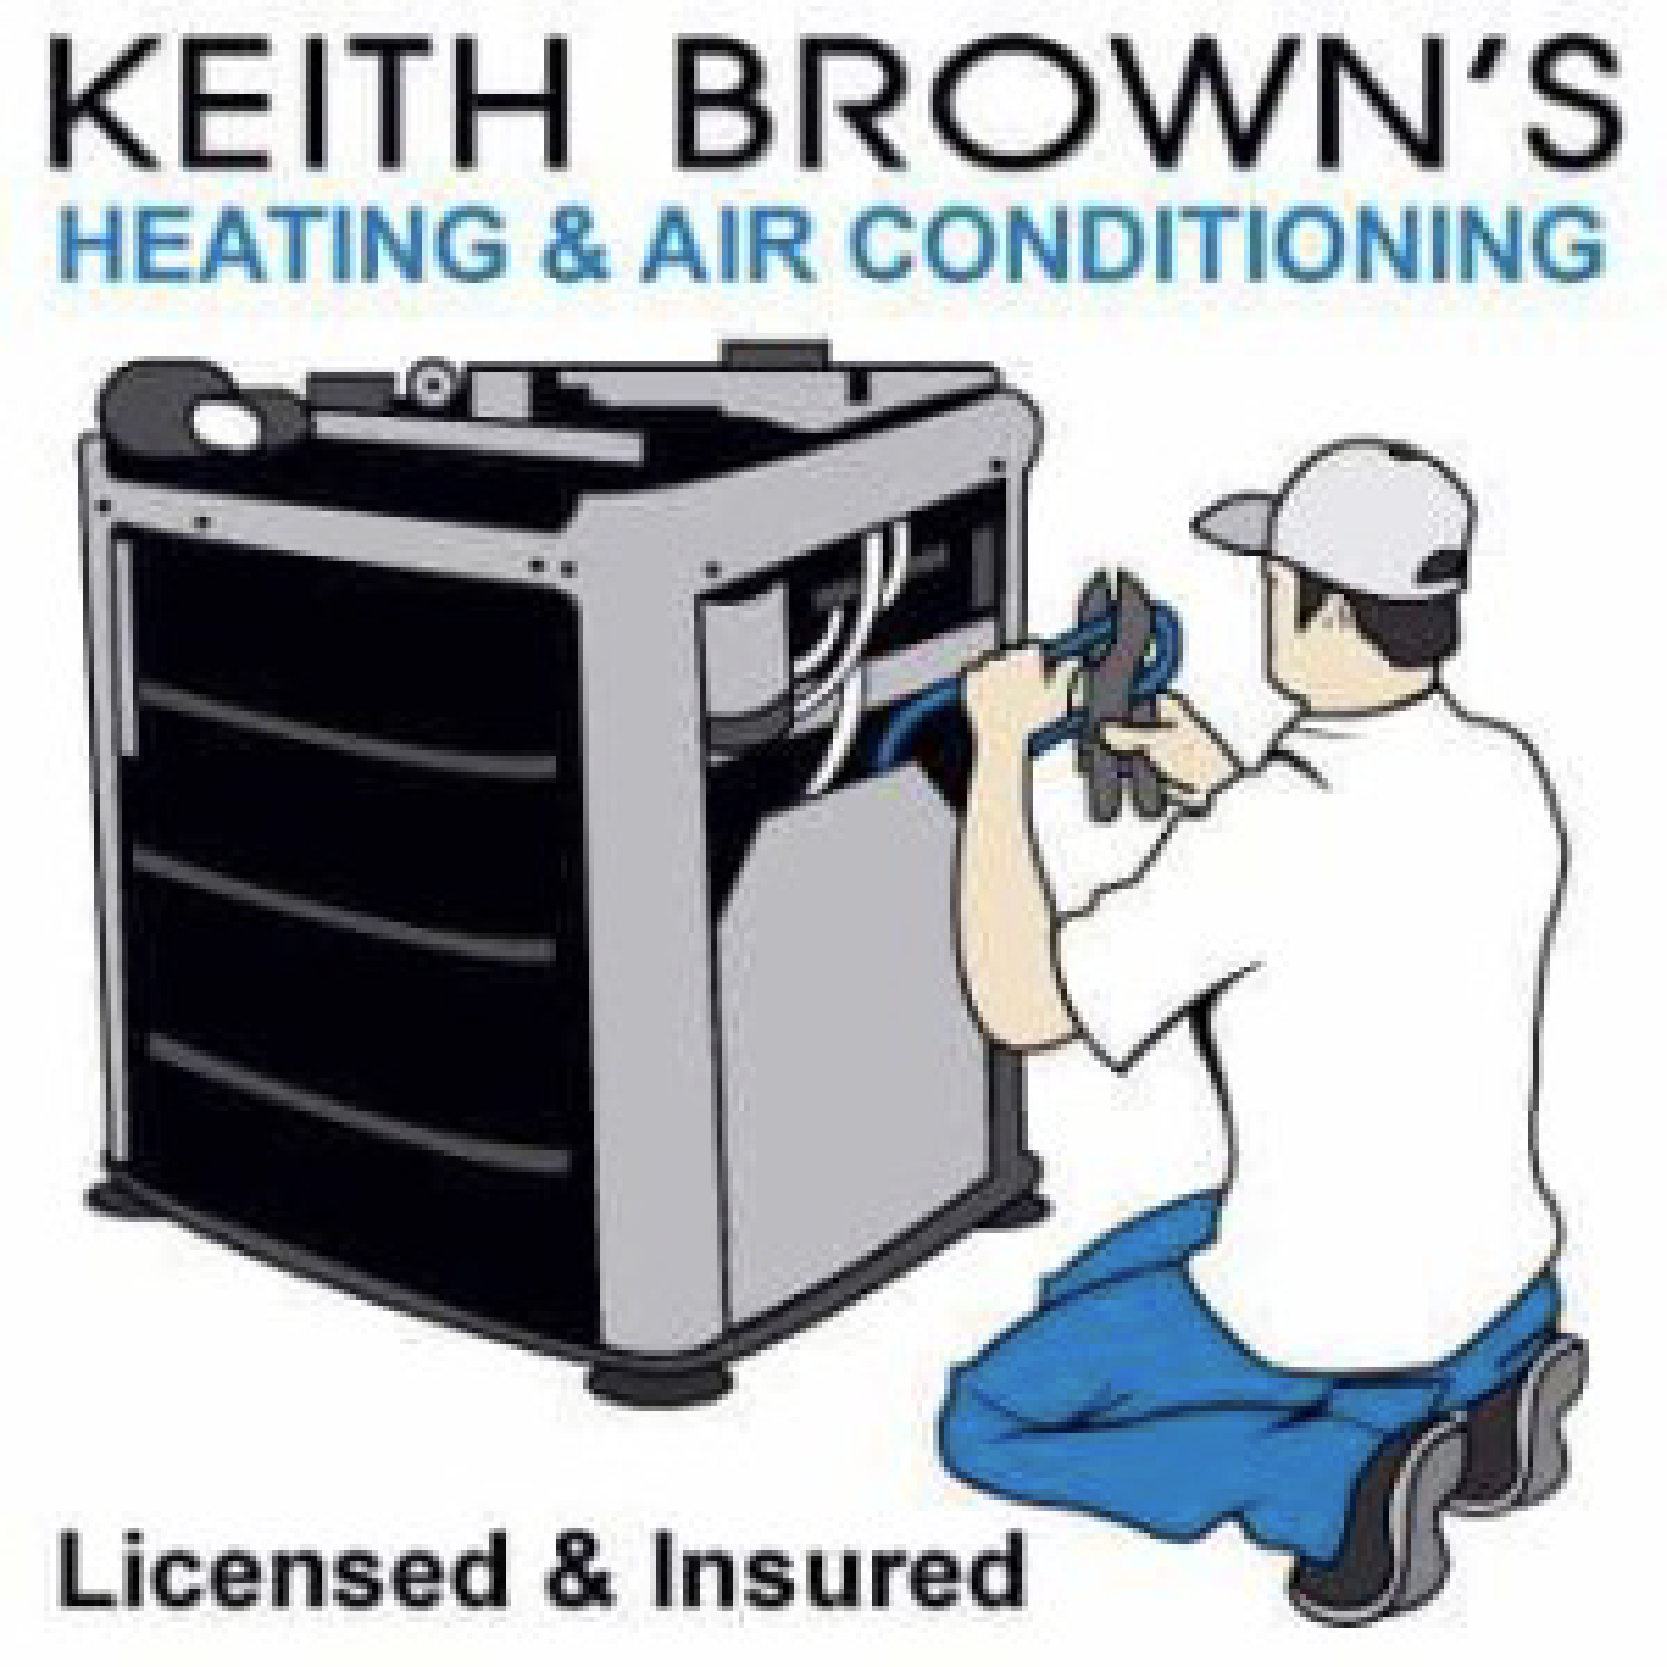 Ukeith-browns-heating-air-conditioning_logo